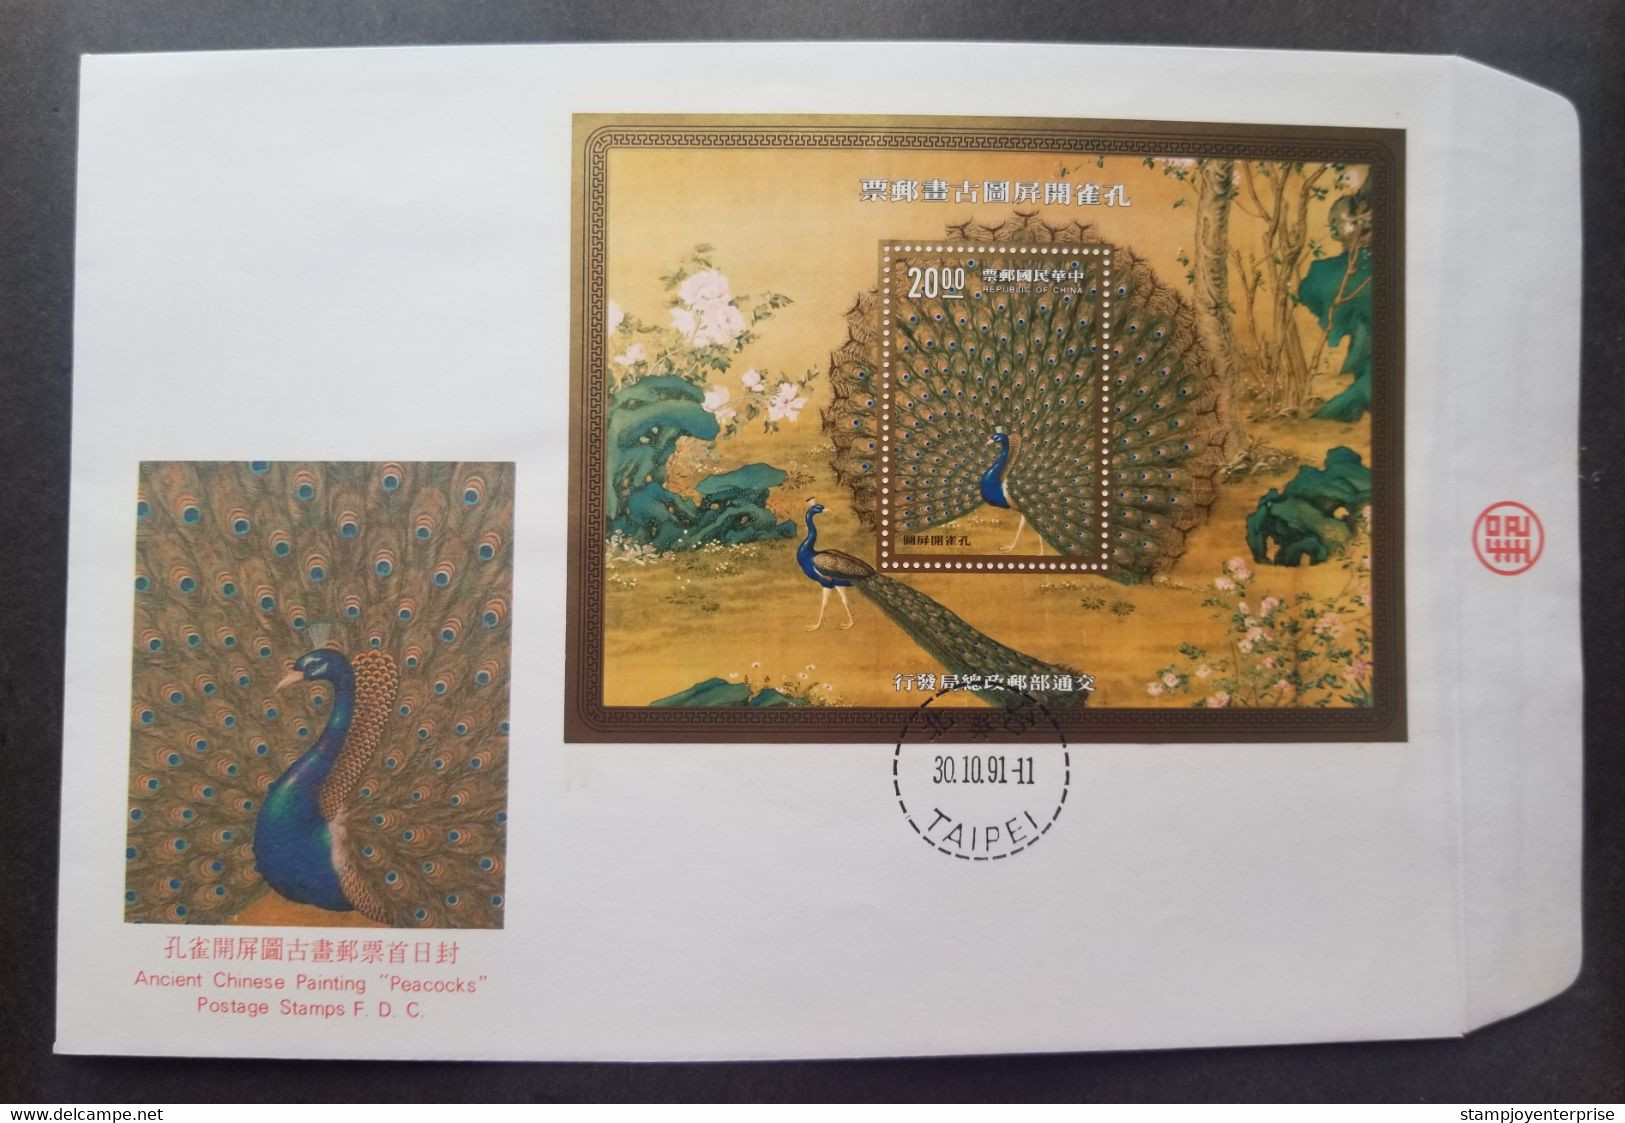 Taiwan Ancient Chinese Painting Peacock 1991 Bird Art Birds Peacocks Pheasant (FDC) - Covers & Documents